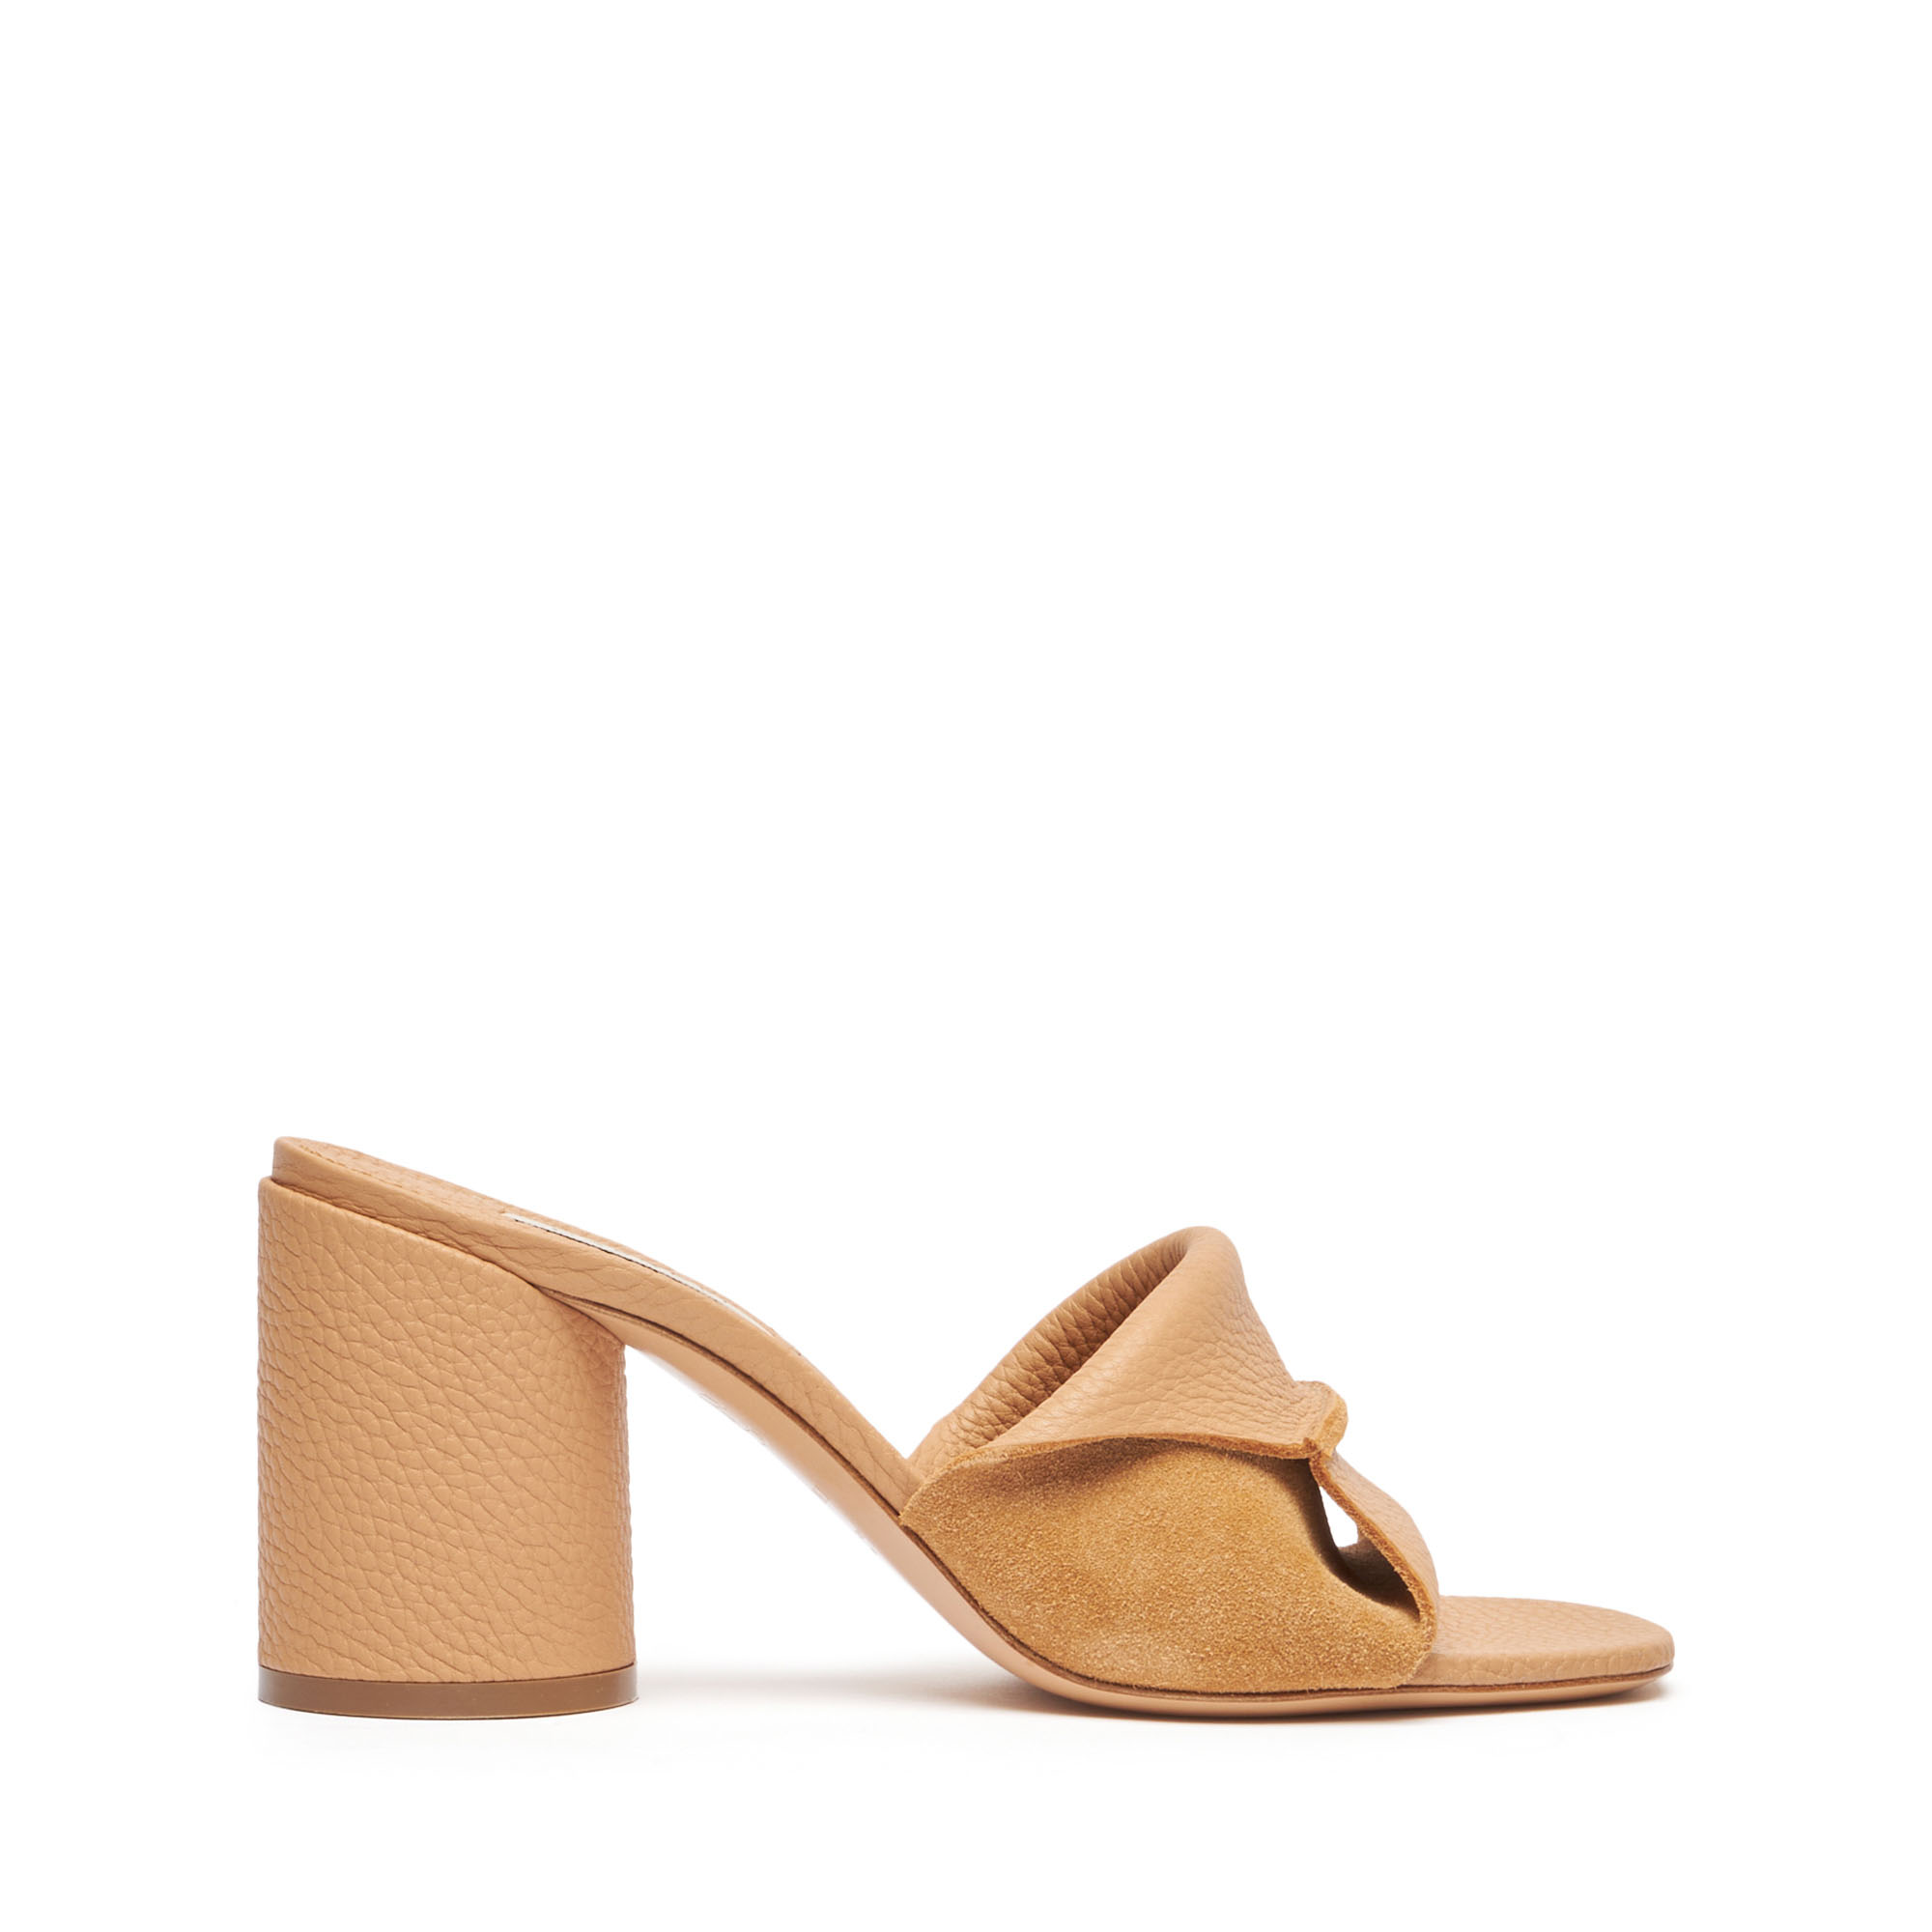 Shop Casadei Parma Cleo Mules - Woman Mules Toffee 41